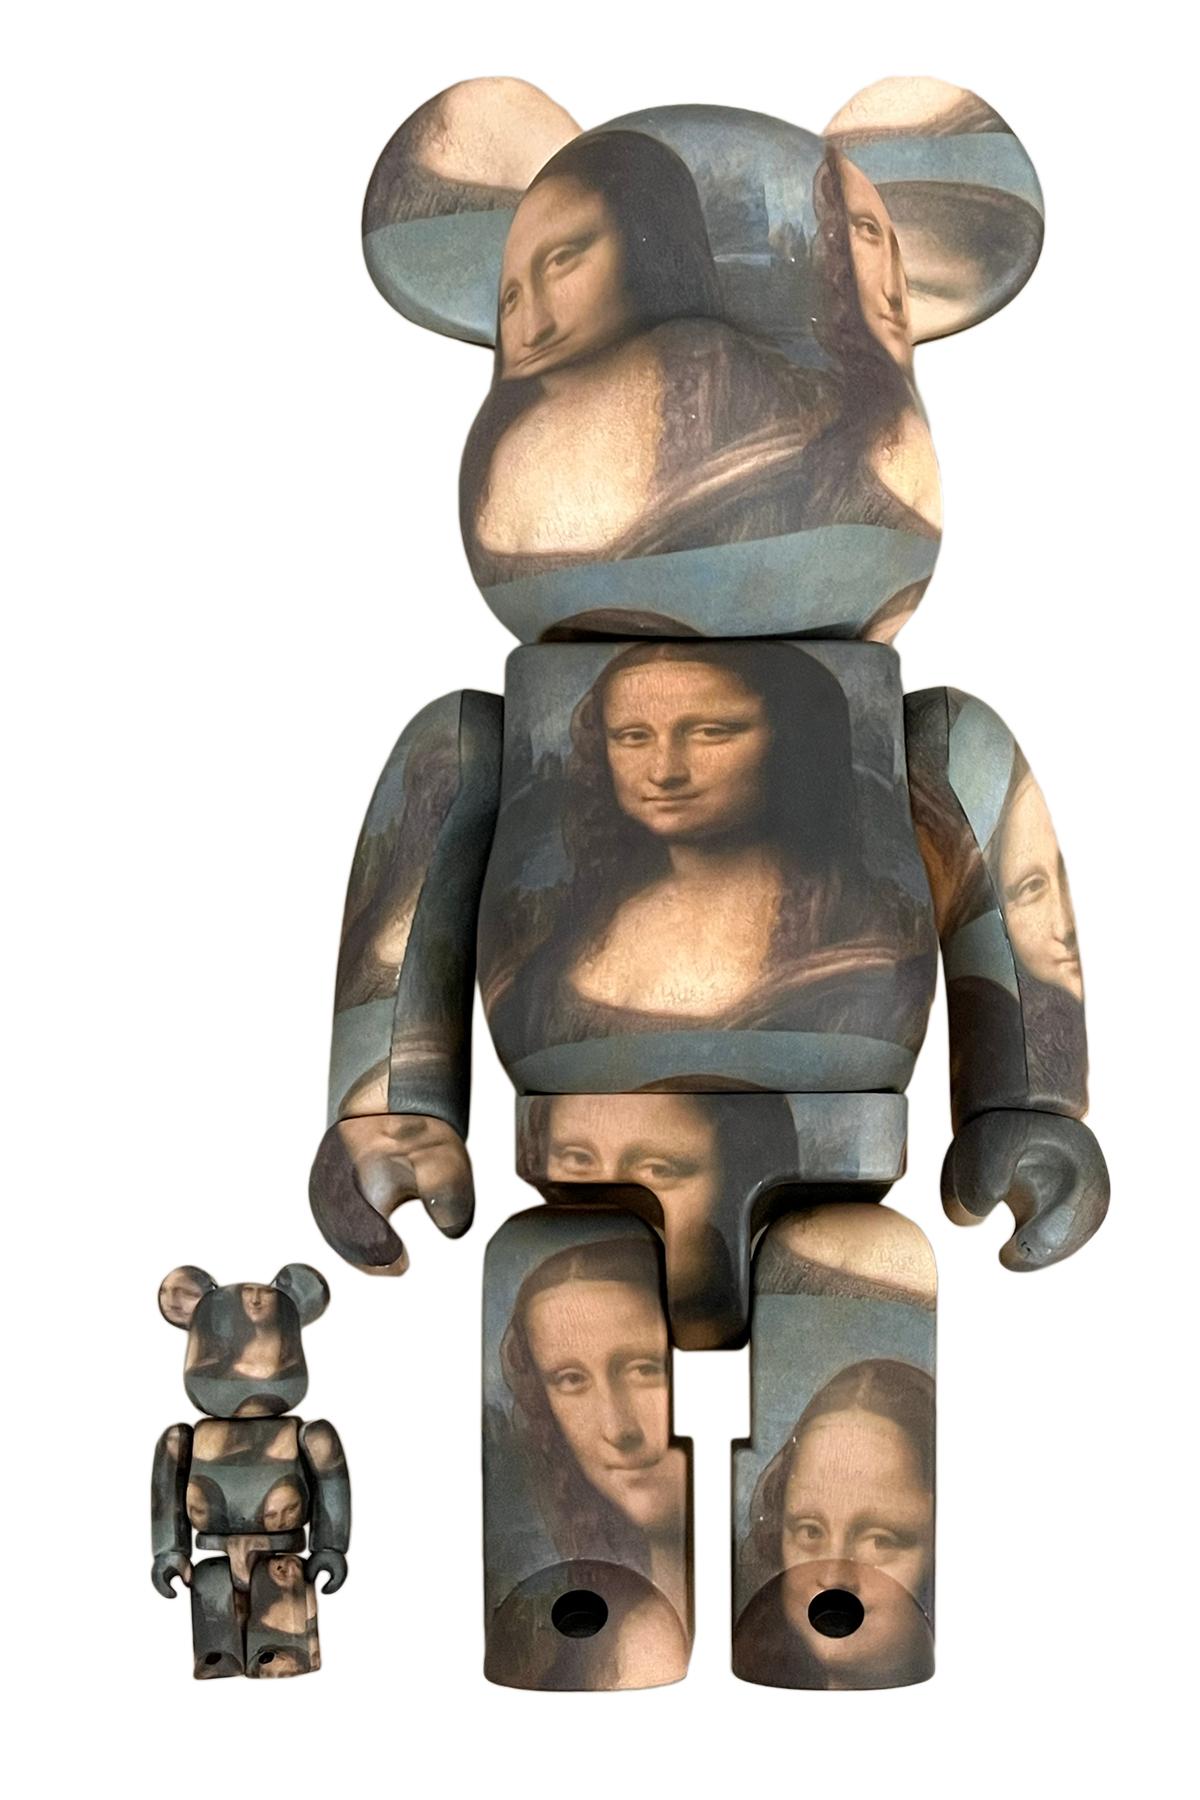 Leonardo da Vinci 400% & 100% Bearbrick:
A unique, timeless Leonardo da Vinci collectible trademarked & licensed by the Louvre Museum Paris (Musee du Louvre). The partnered collectible reveal the artist’s iconic Mona Lisa imagery wrapping the figure